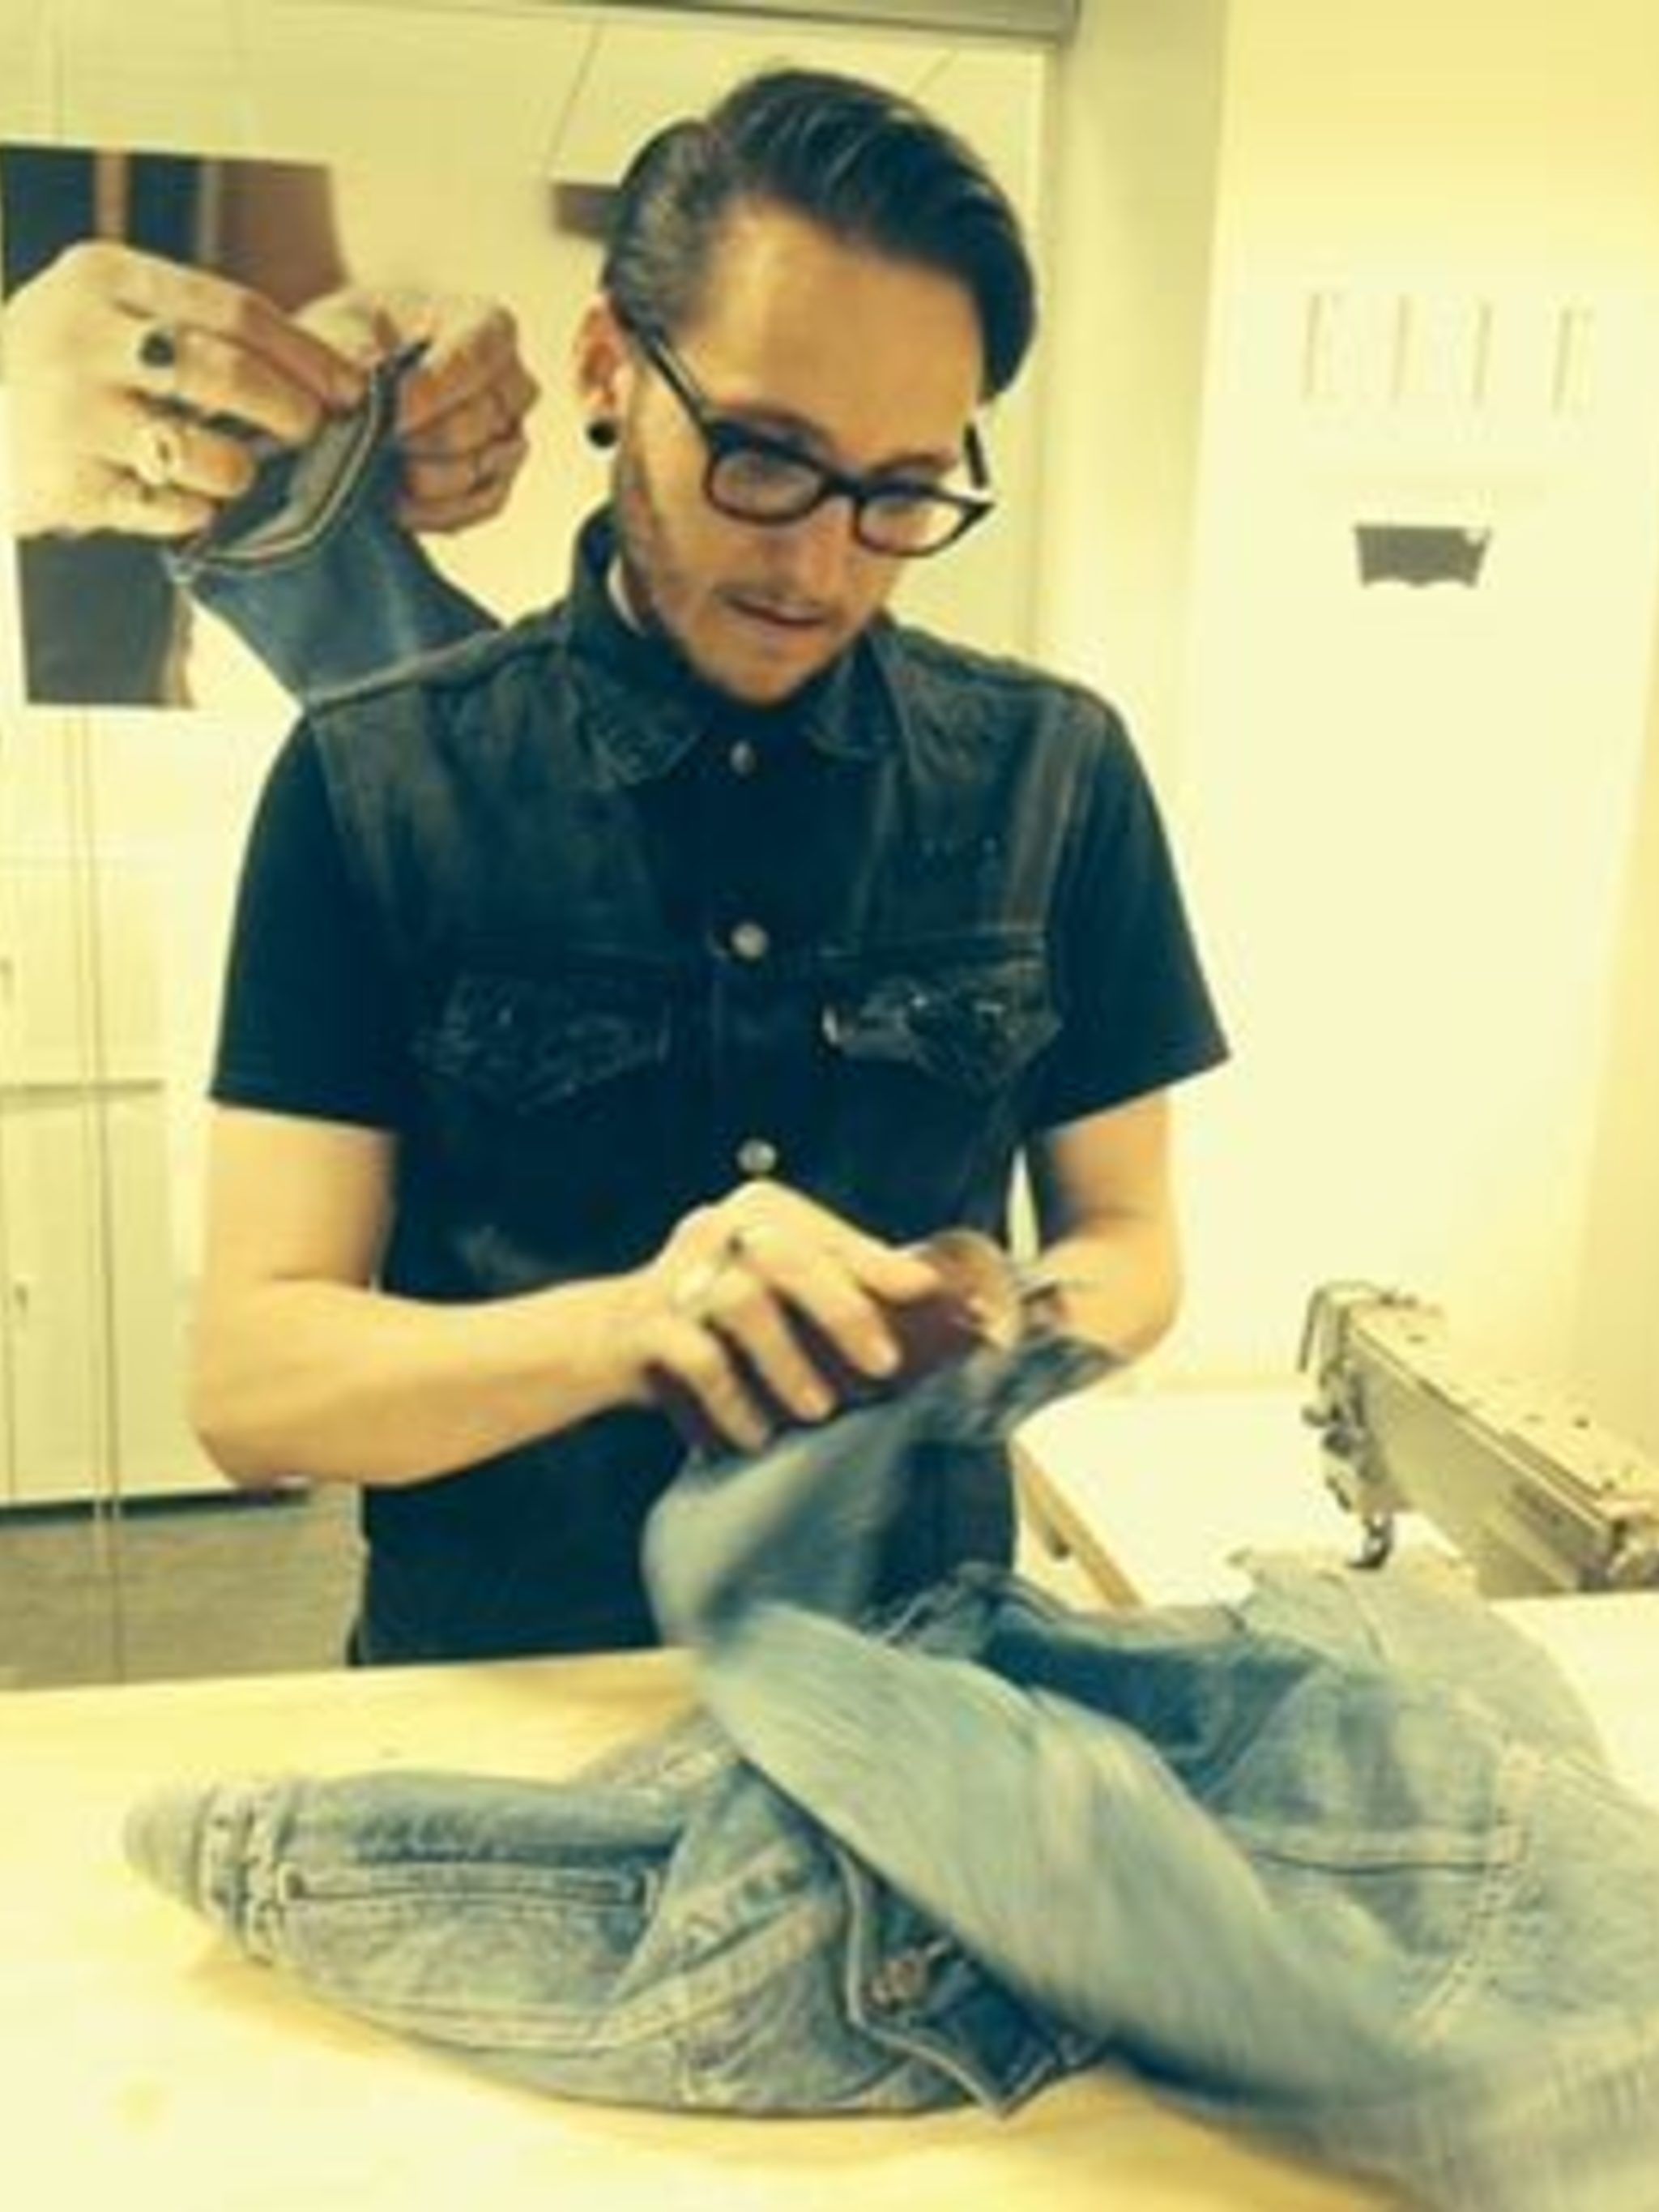 levis tailoring service